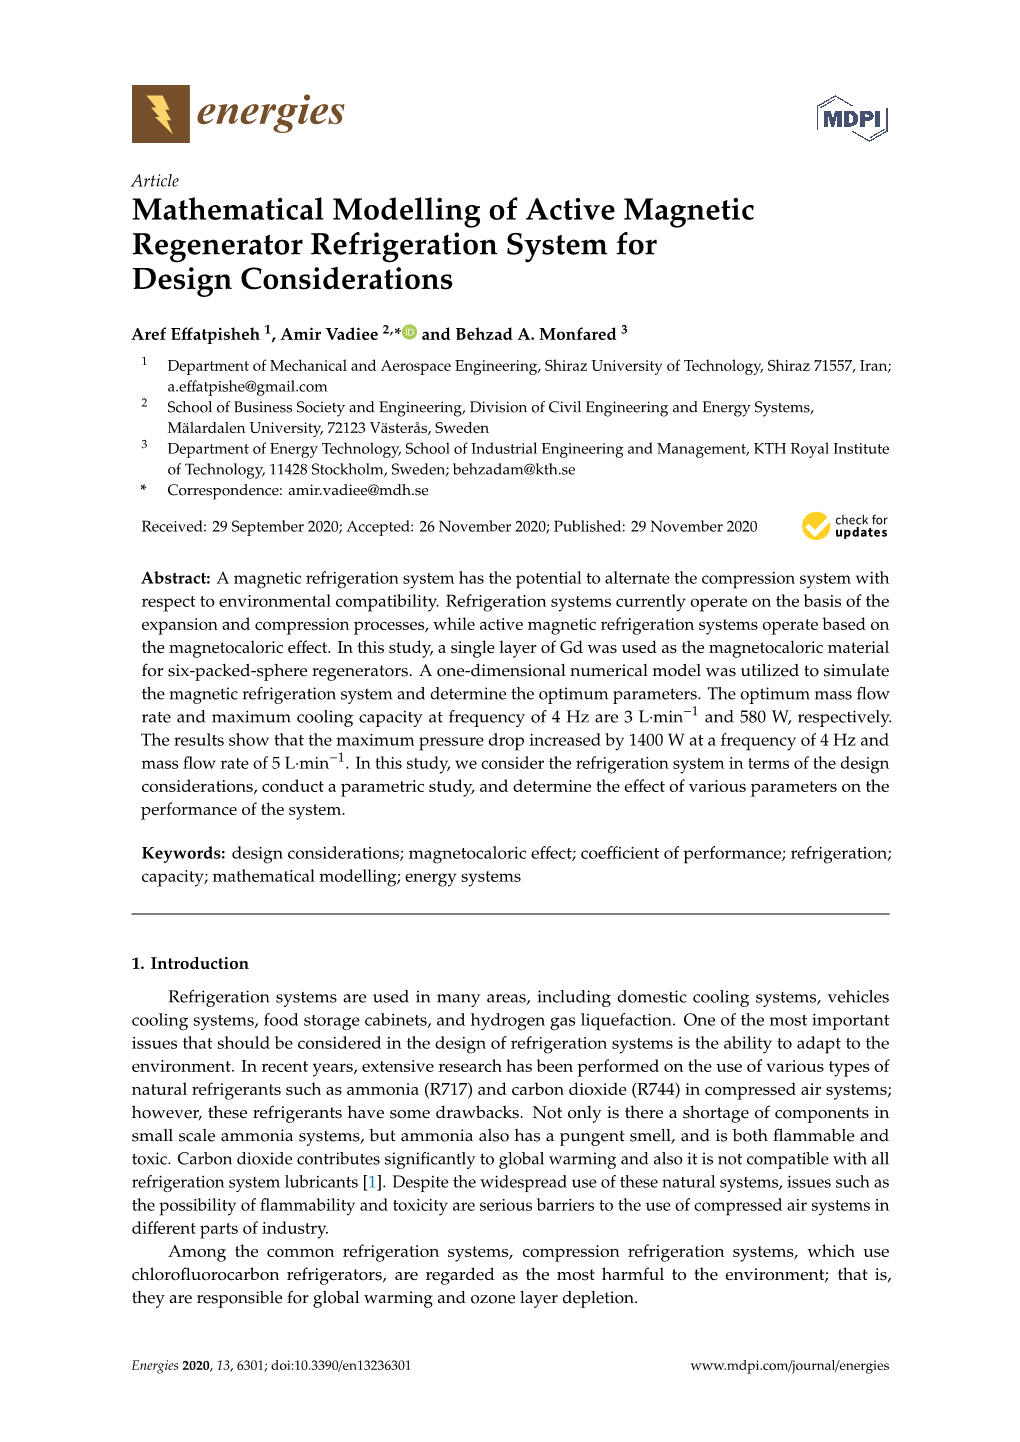 Mathematical Modelling of Active Magnetic Regenerator Refrigeration System for Design Considerations